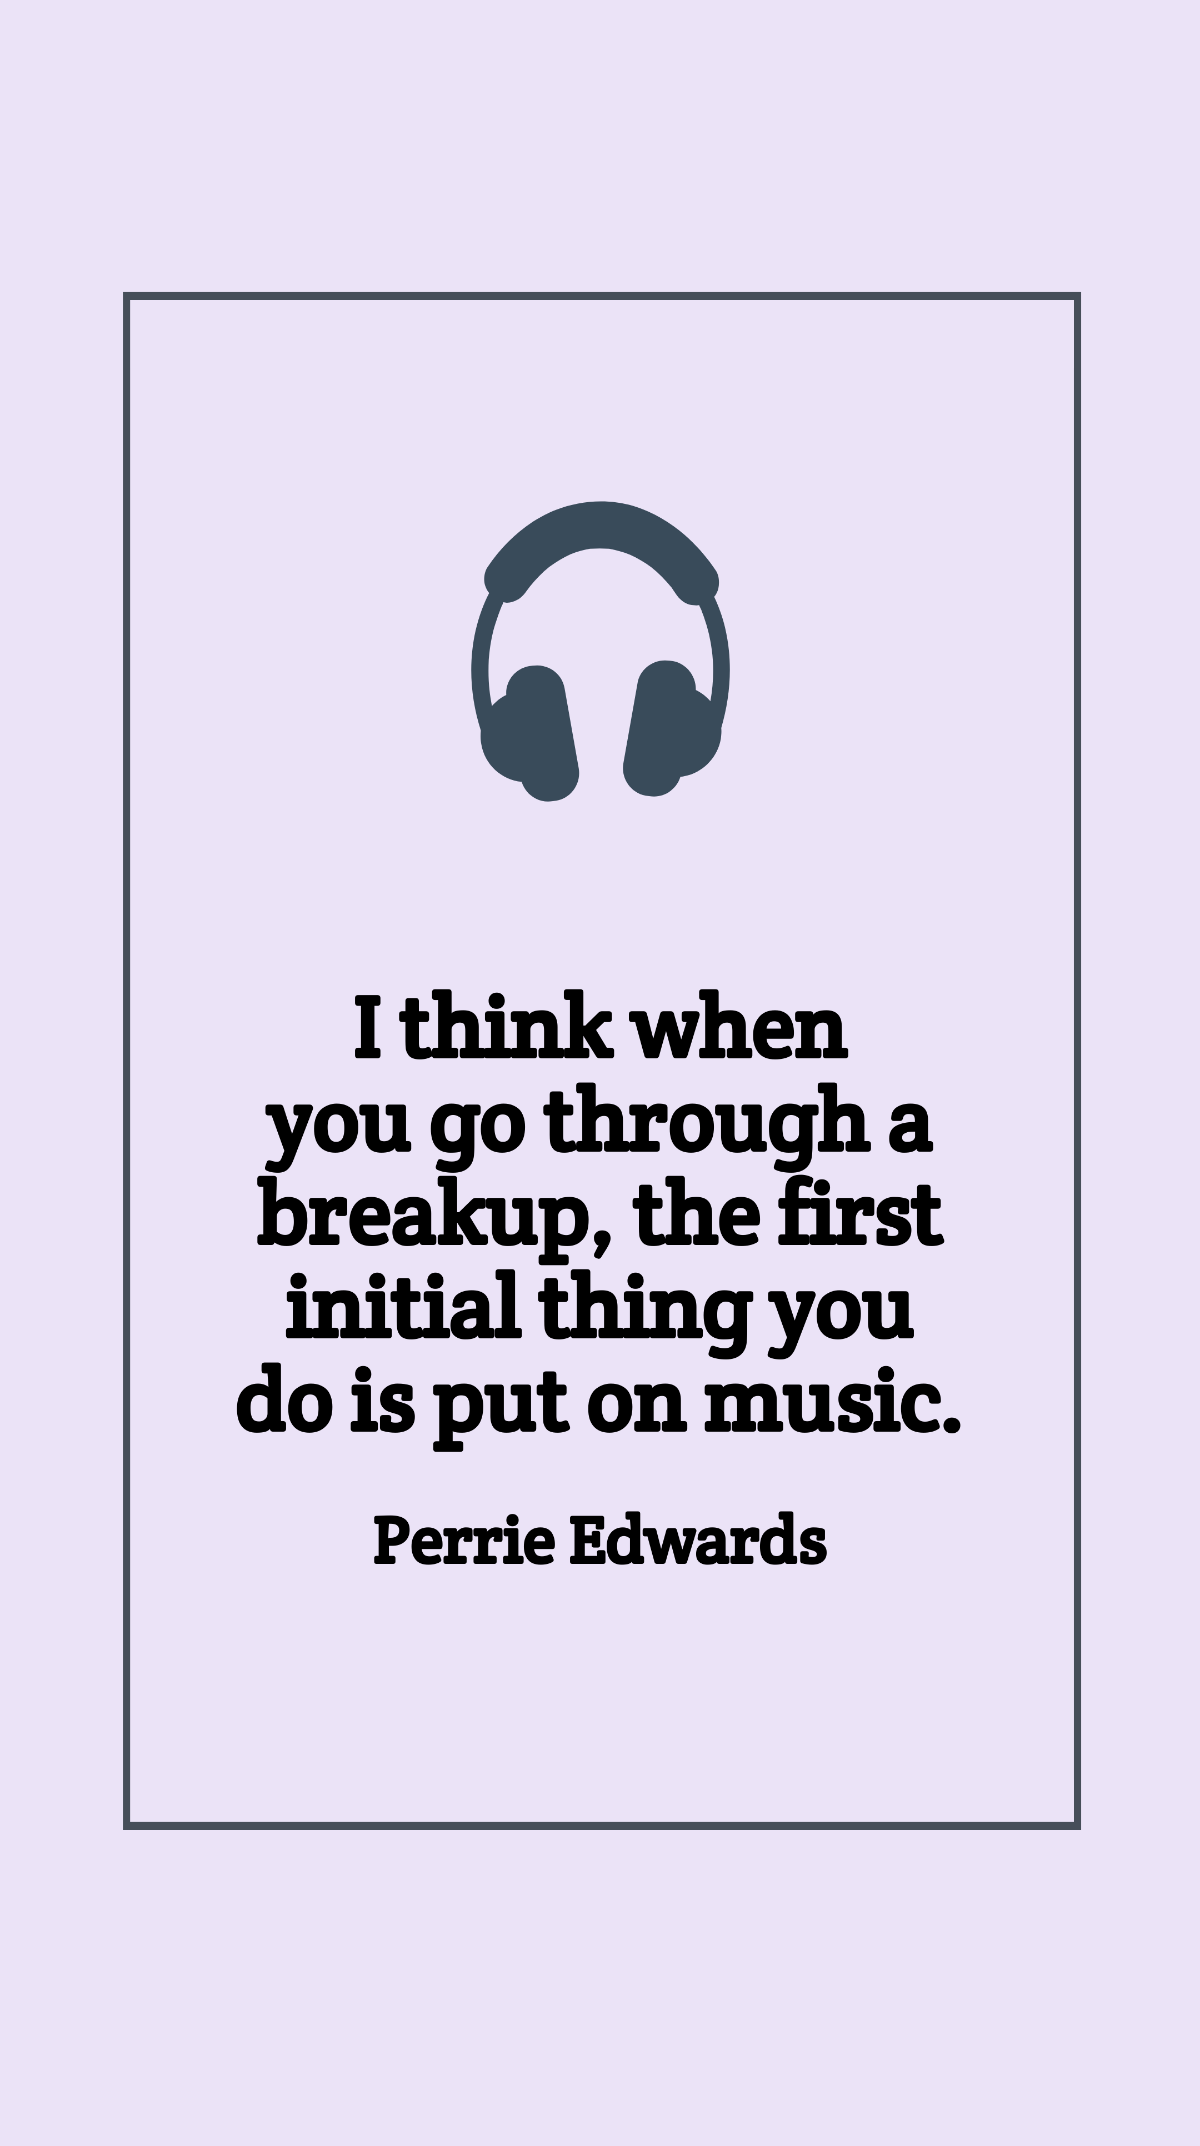 Perrie Edwards - I think when you go through a breakup, the first initial thing you do is put on music. Template